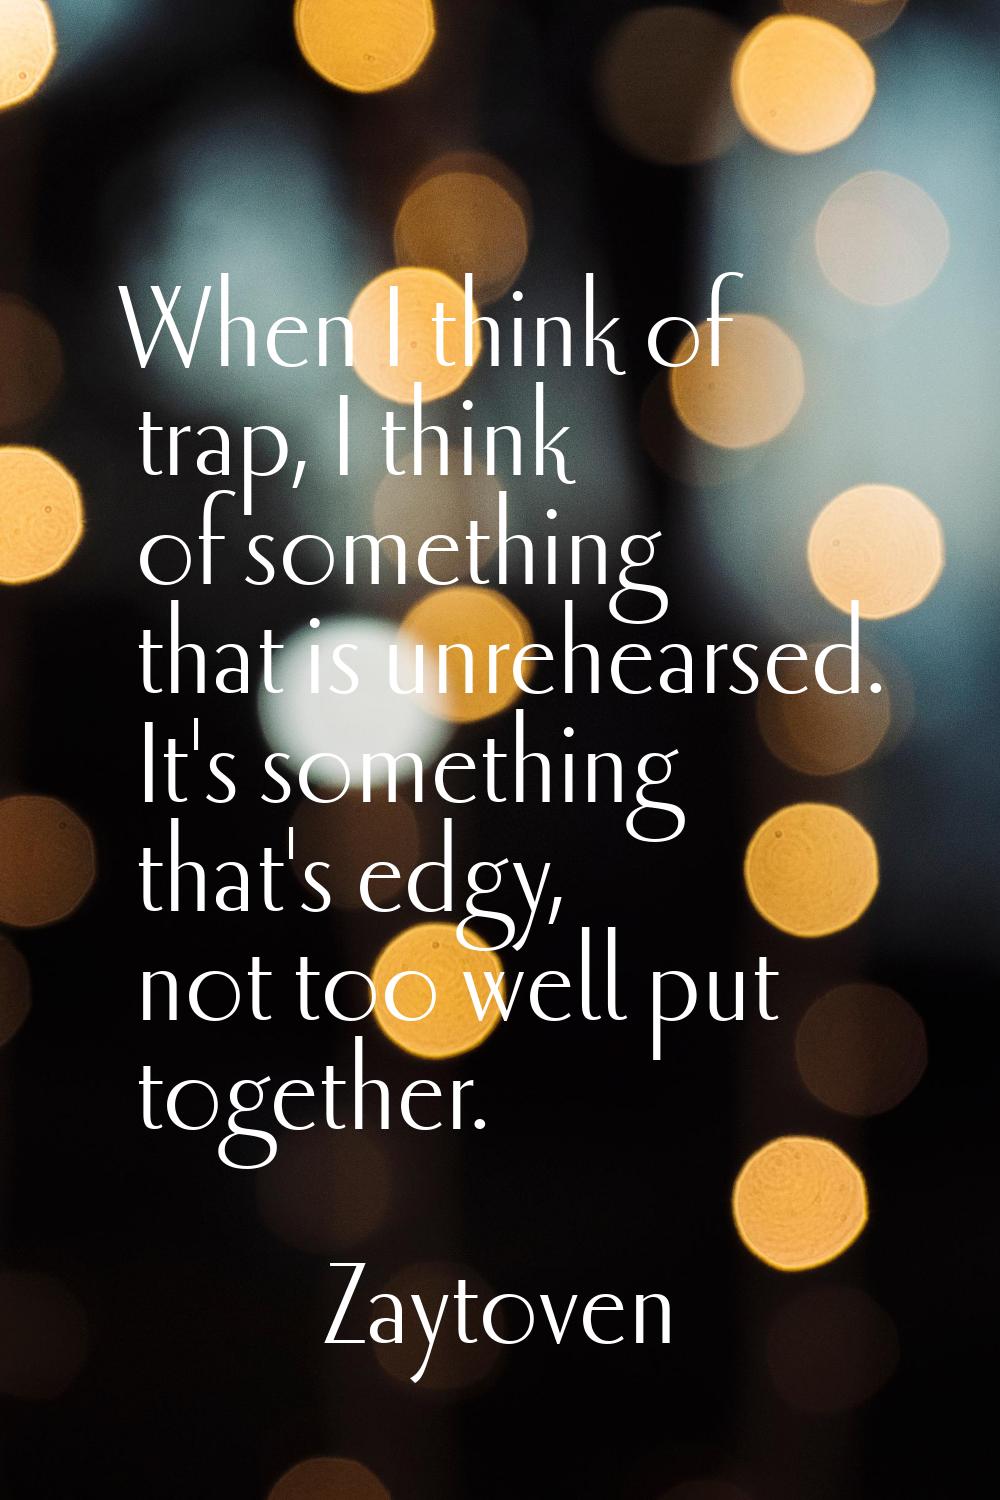 When I think of trap, I think of something that is unrehearsed. It's something that's edgy, not too